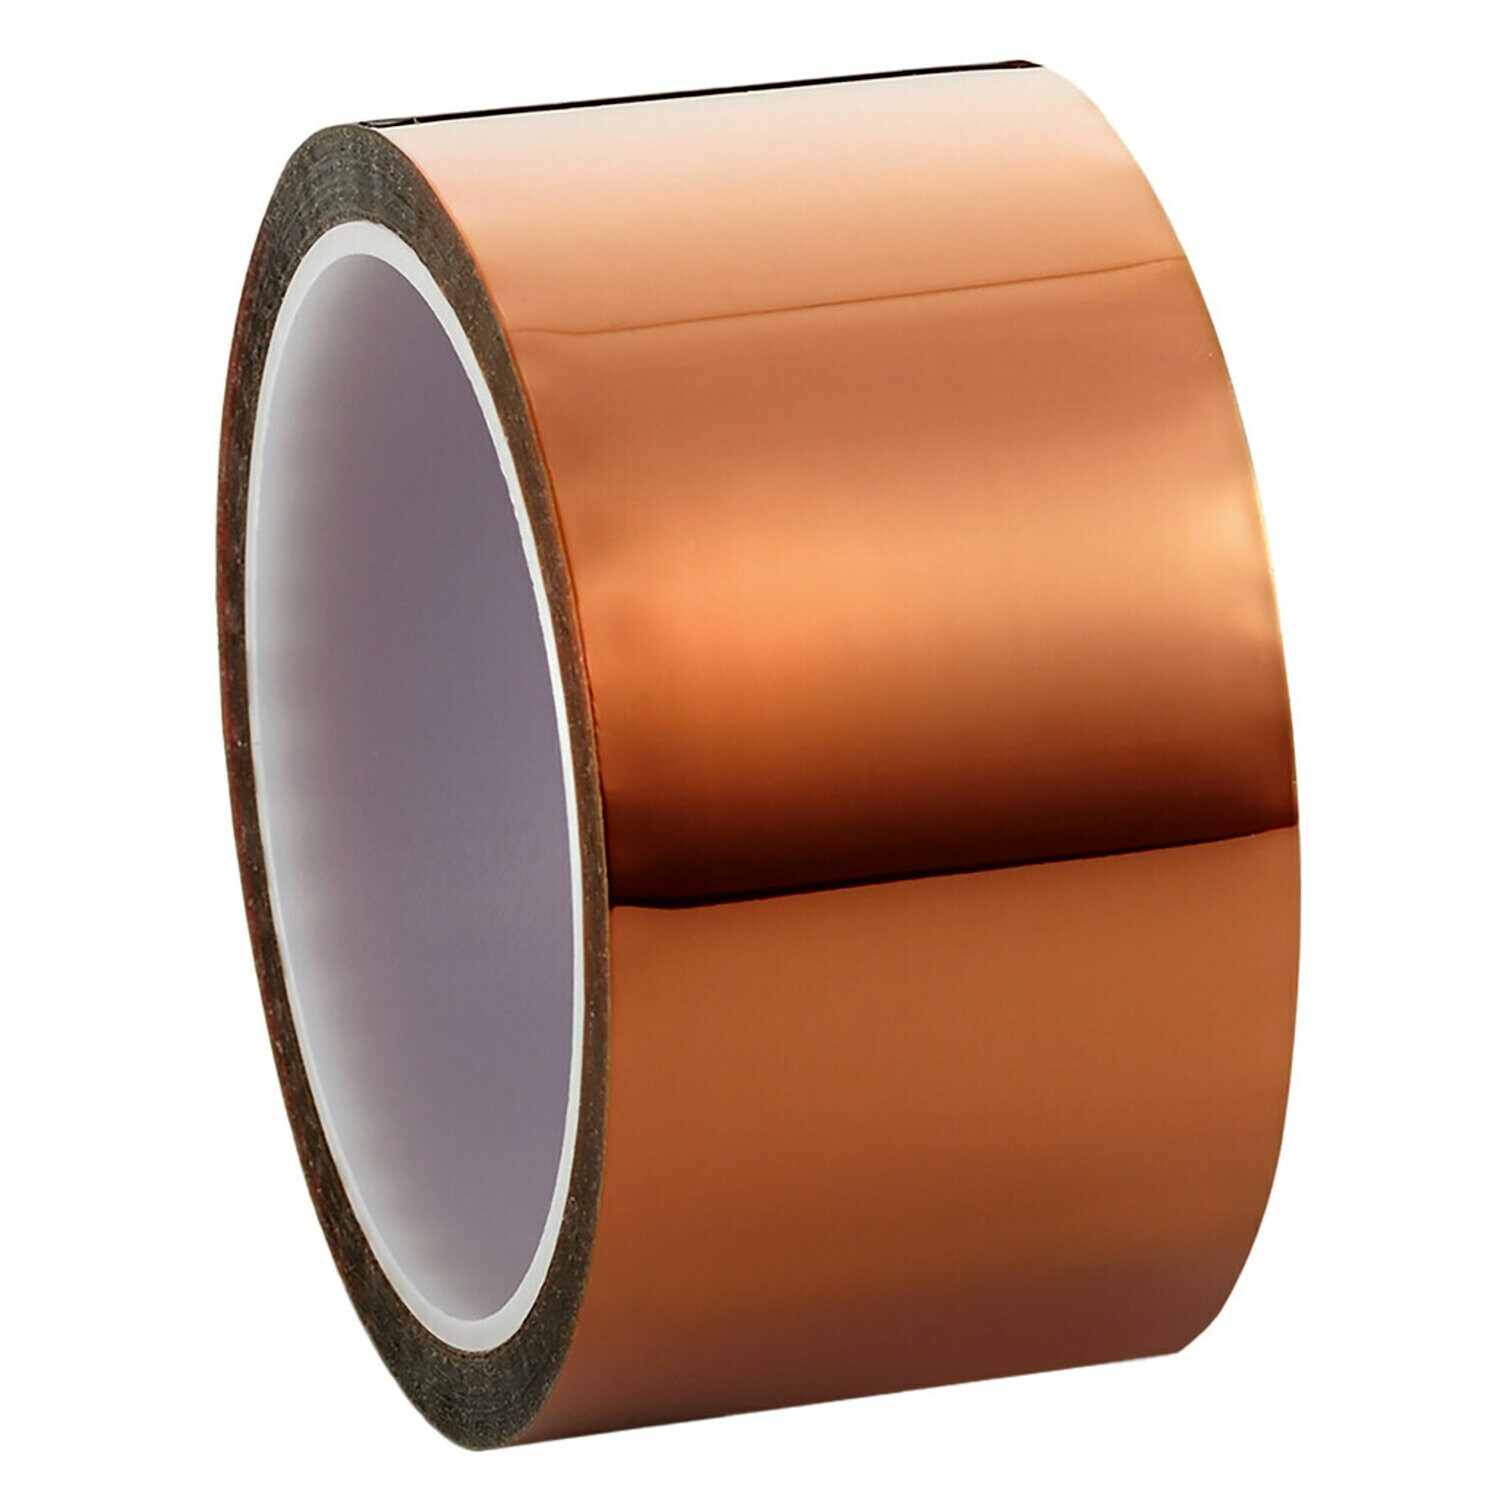 7100059442 - 3M Polyimide Tape 8997, Light Amber, 3 in x 36 yd, 2.2 mil, 12 rolls
per case